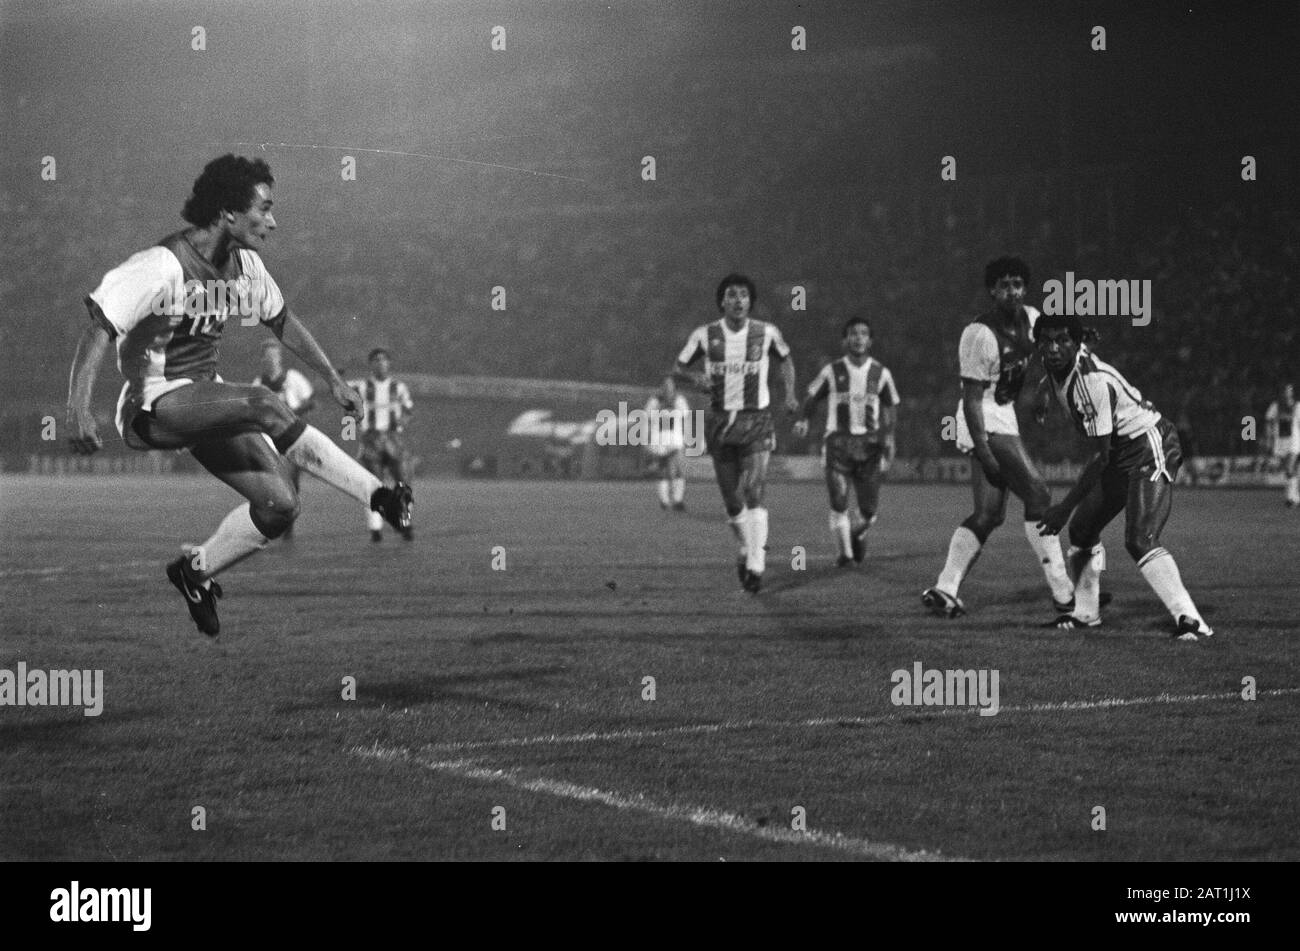 Europa Cup I Ajax against Porto 0-0; game moments Date: October 2, 1985  Keywords: sport, football Institution name: AJAX Stock Photo - Alamy